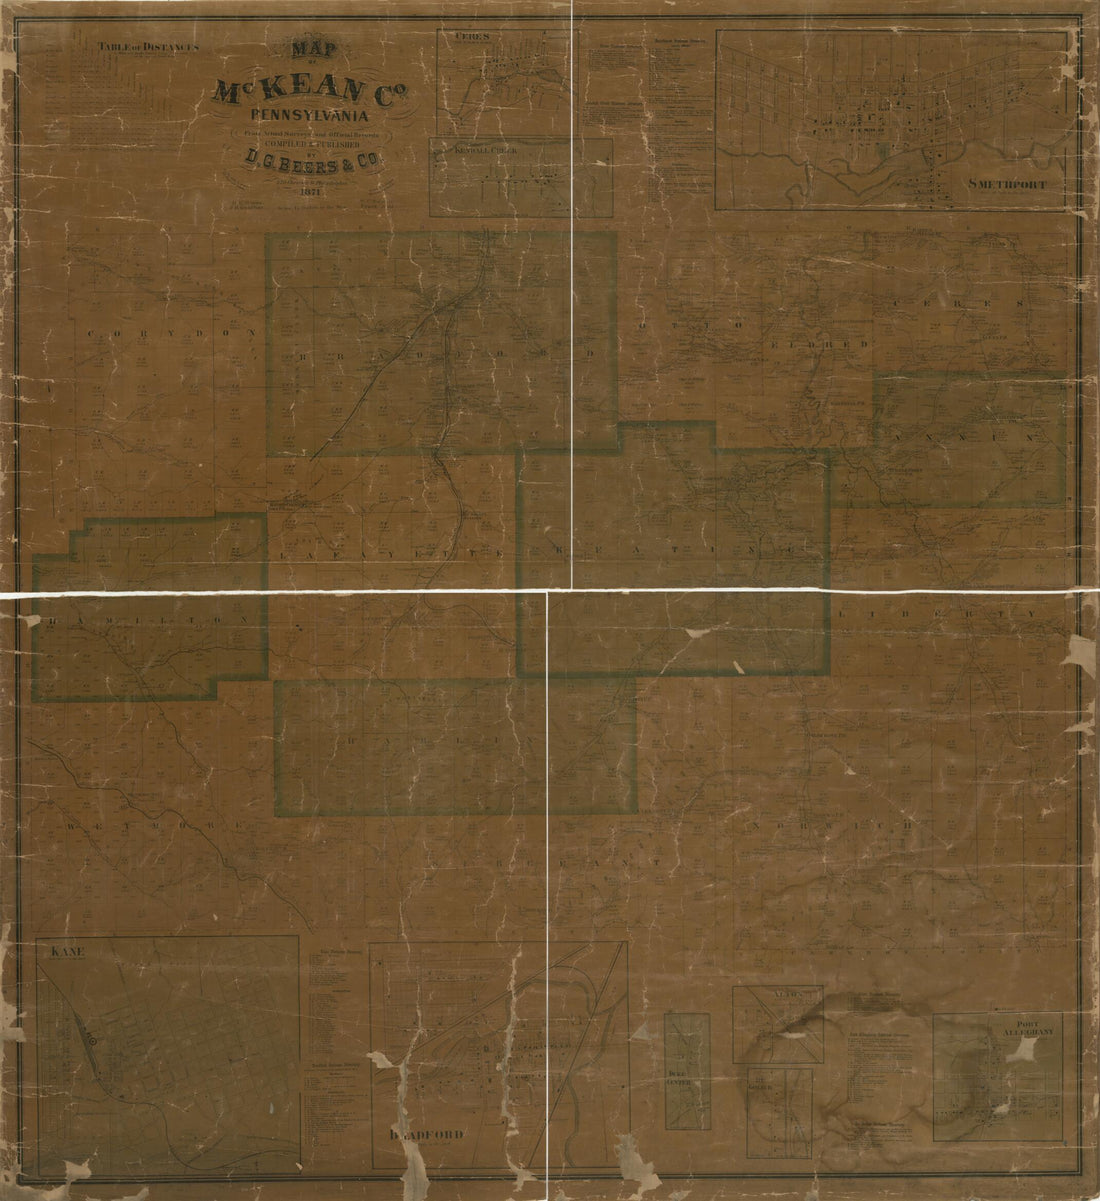 This old map of Map of McKean Co., Pennsylvania : from Actual Surveys and Official Records from 1871 was created by D. G. (Daniel G.) Beers, F. (Frederick) Bourquin,  D.G. Beers &amp; Co, J. H. Goodhue,  Worley &amp; Bracher in 1871